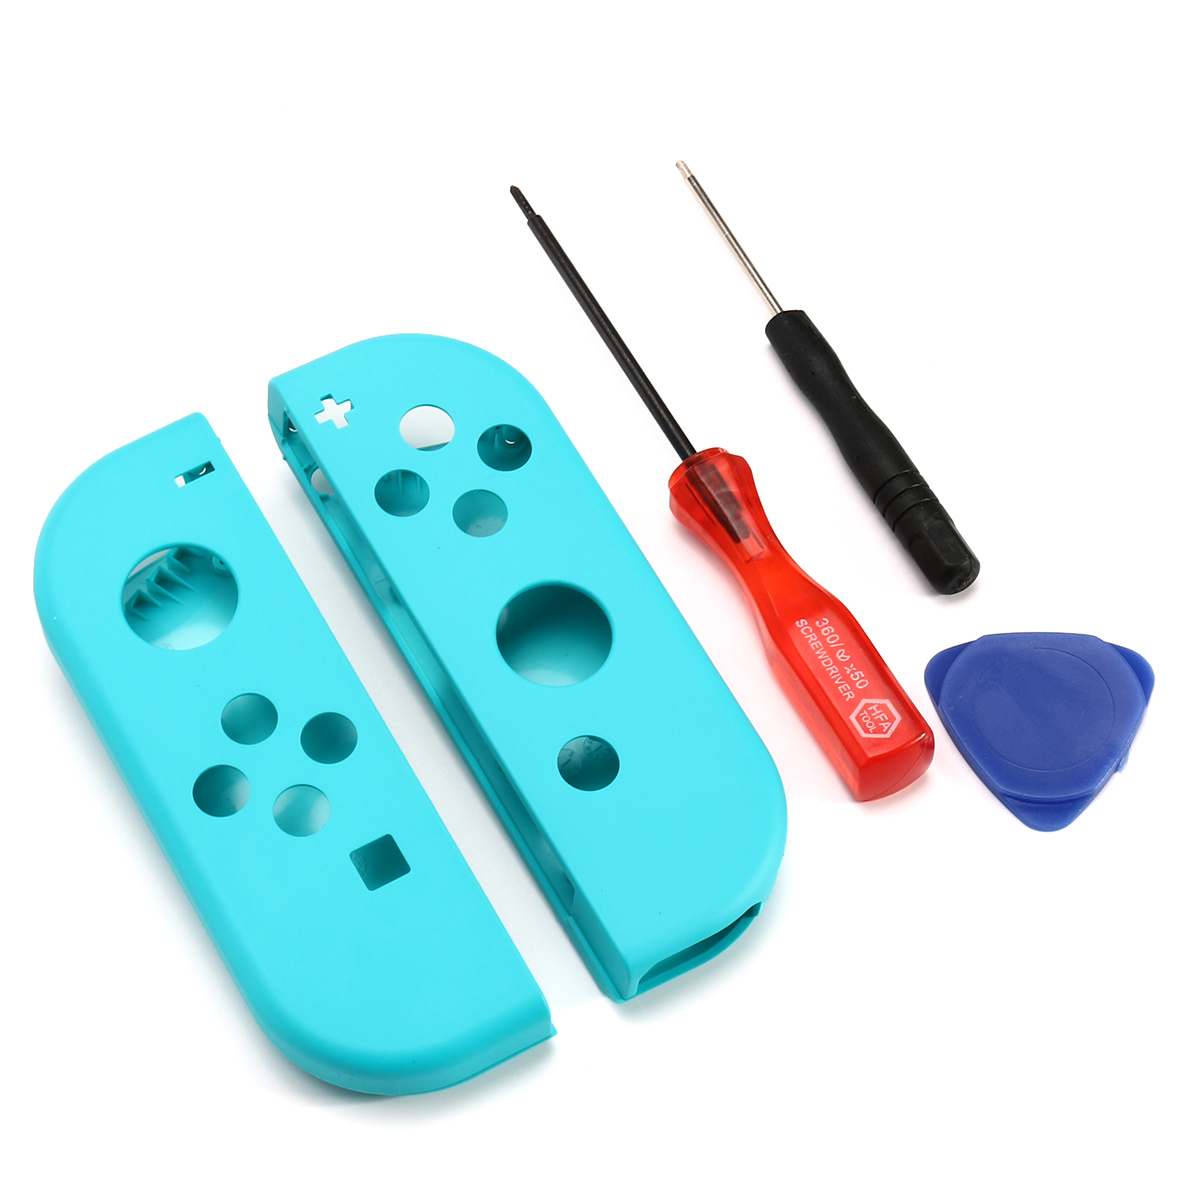 Blue Housing Shell Case with Repair Tool for Nintendo Switch Joy-Con Video Game Controller